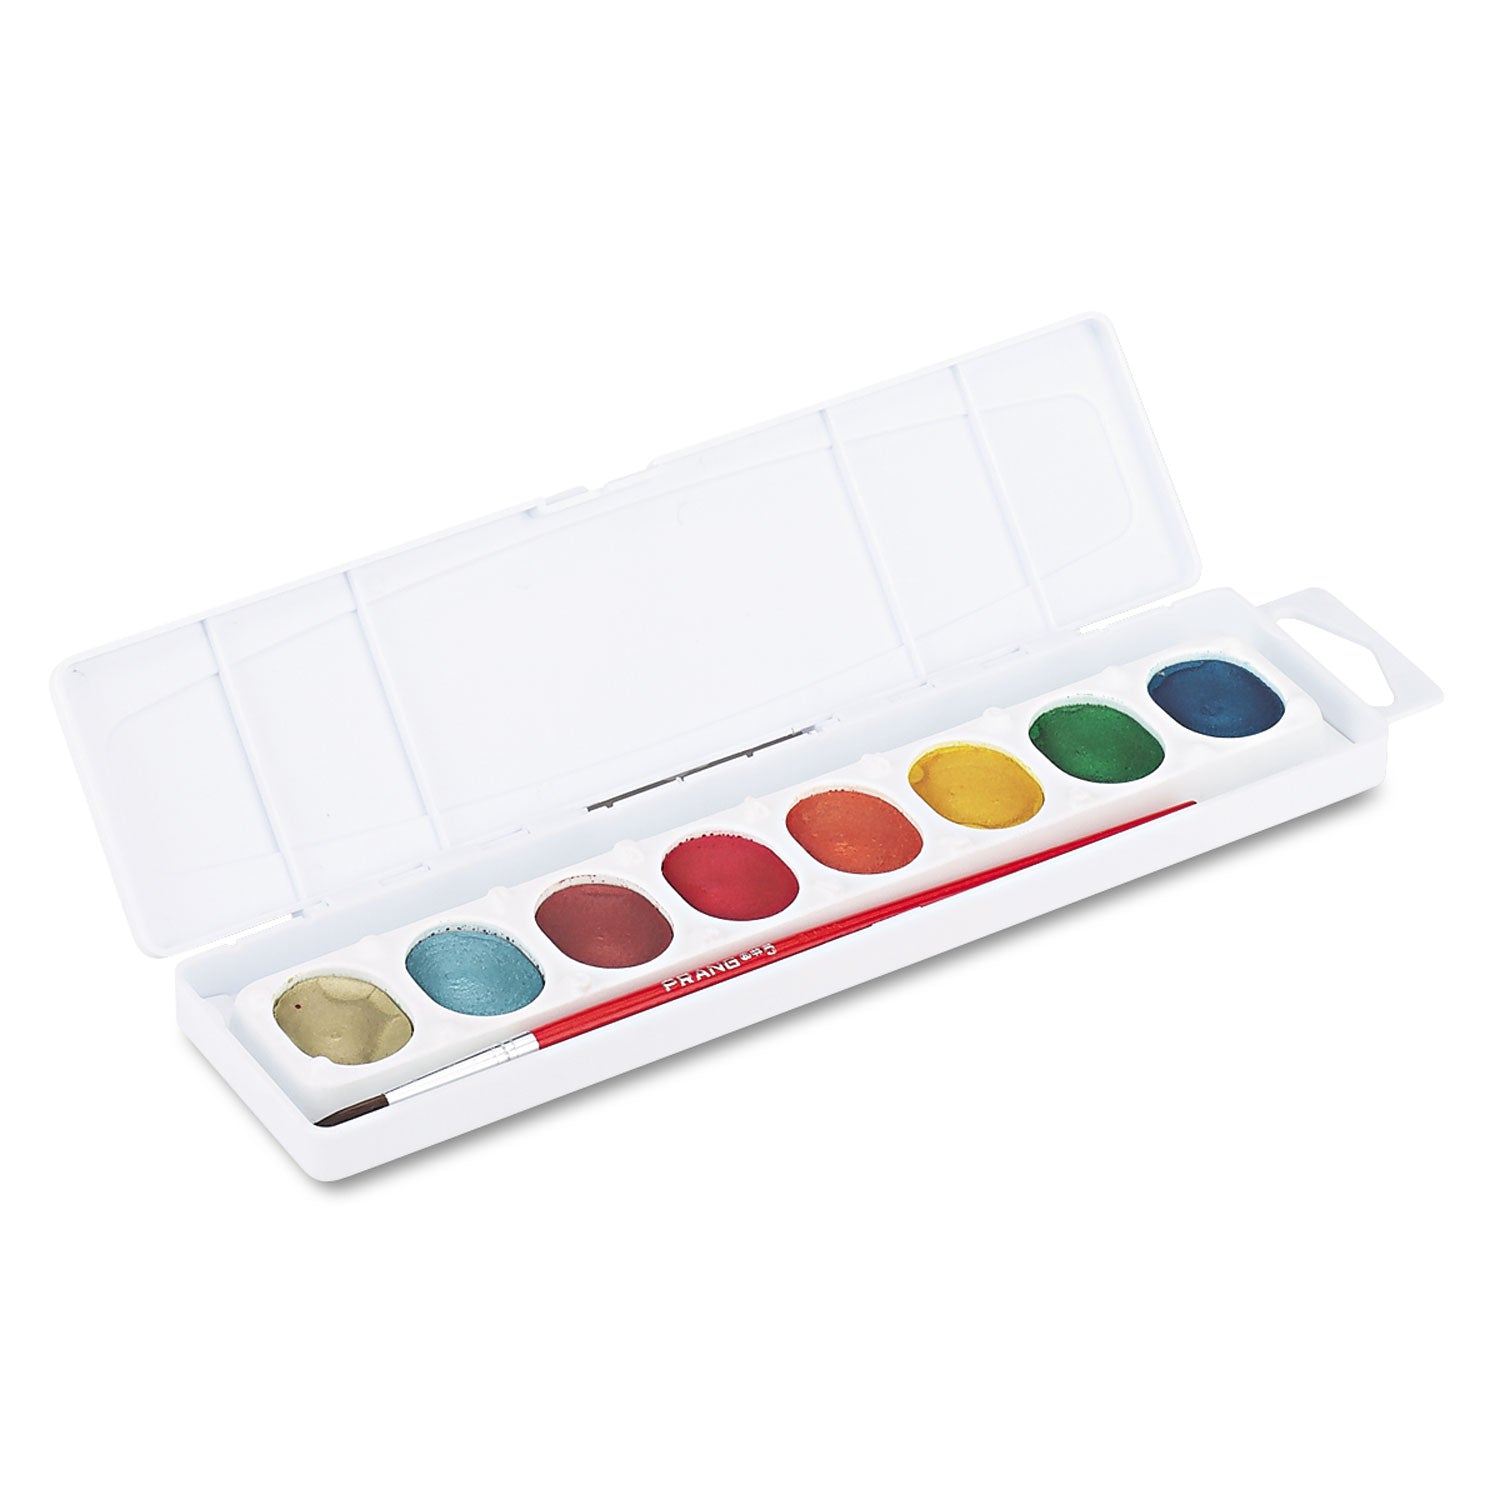 Metallic Washable Watercolors, 8 Assorted Metallic Colors, Palette Tray - 